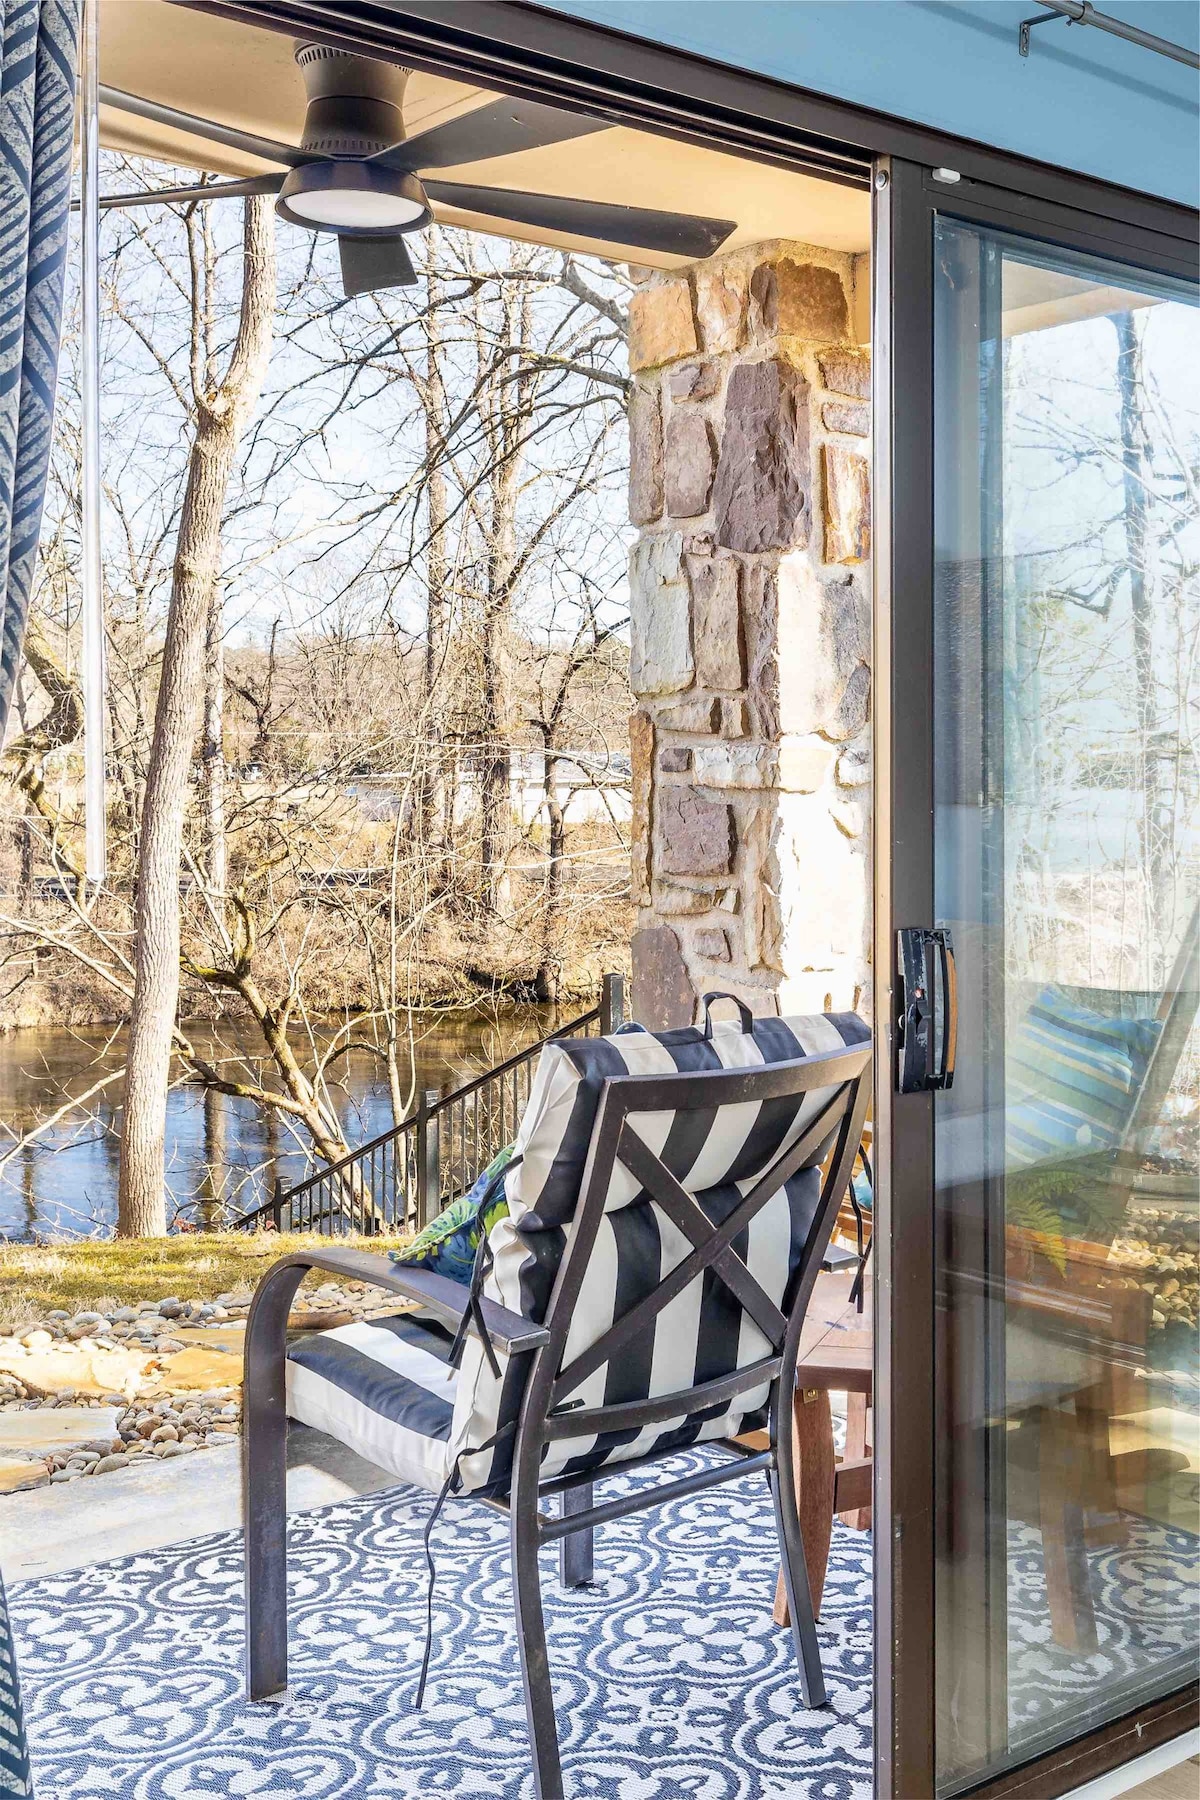 Just steps from your private patio to the river